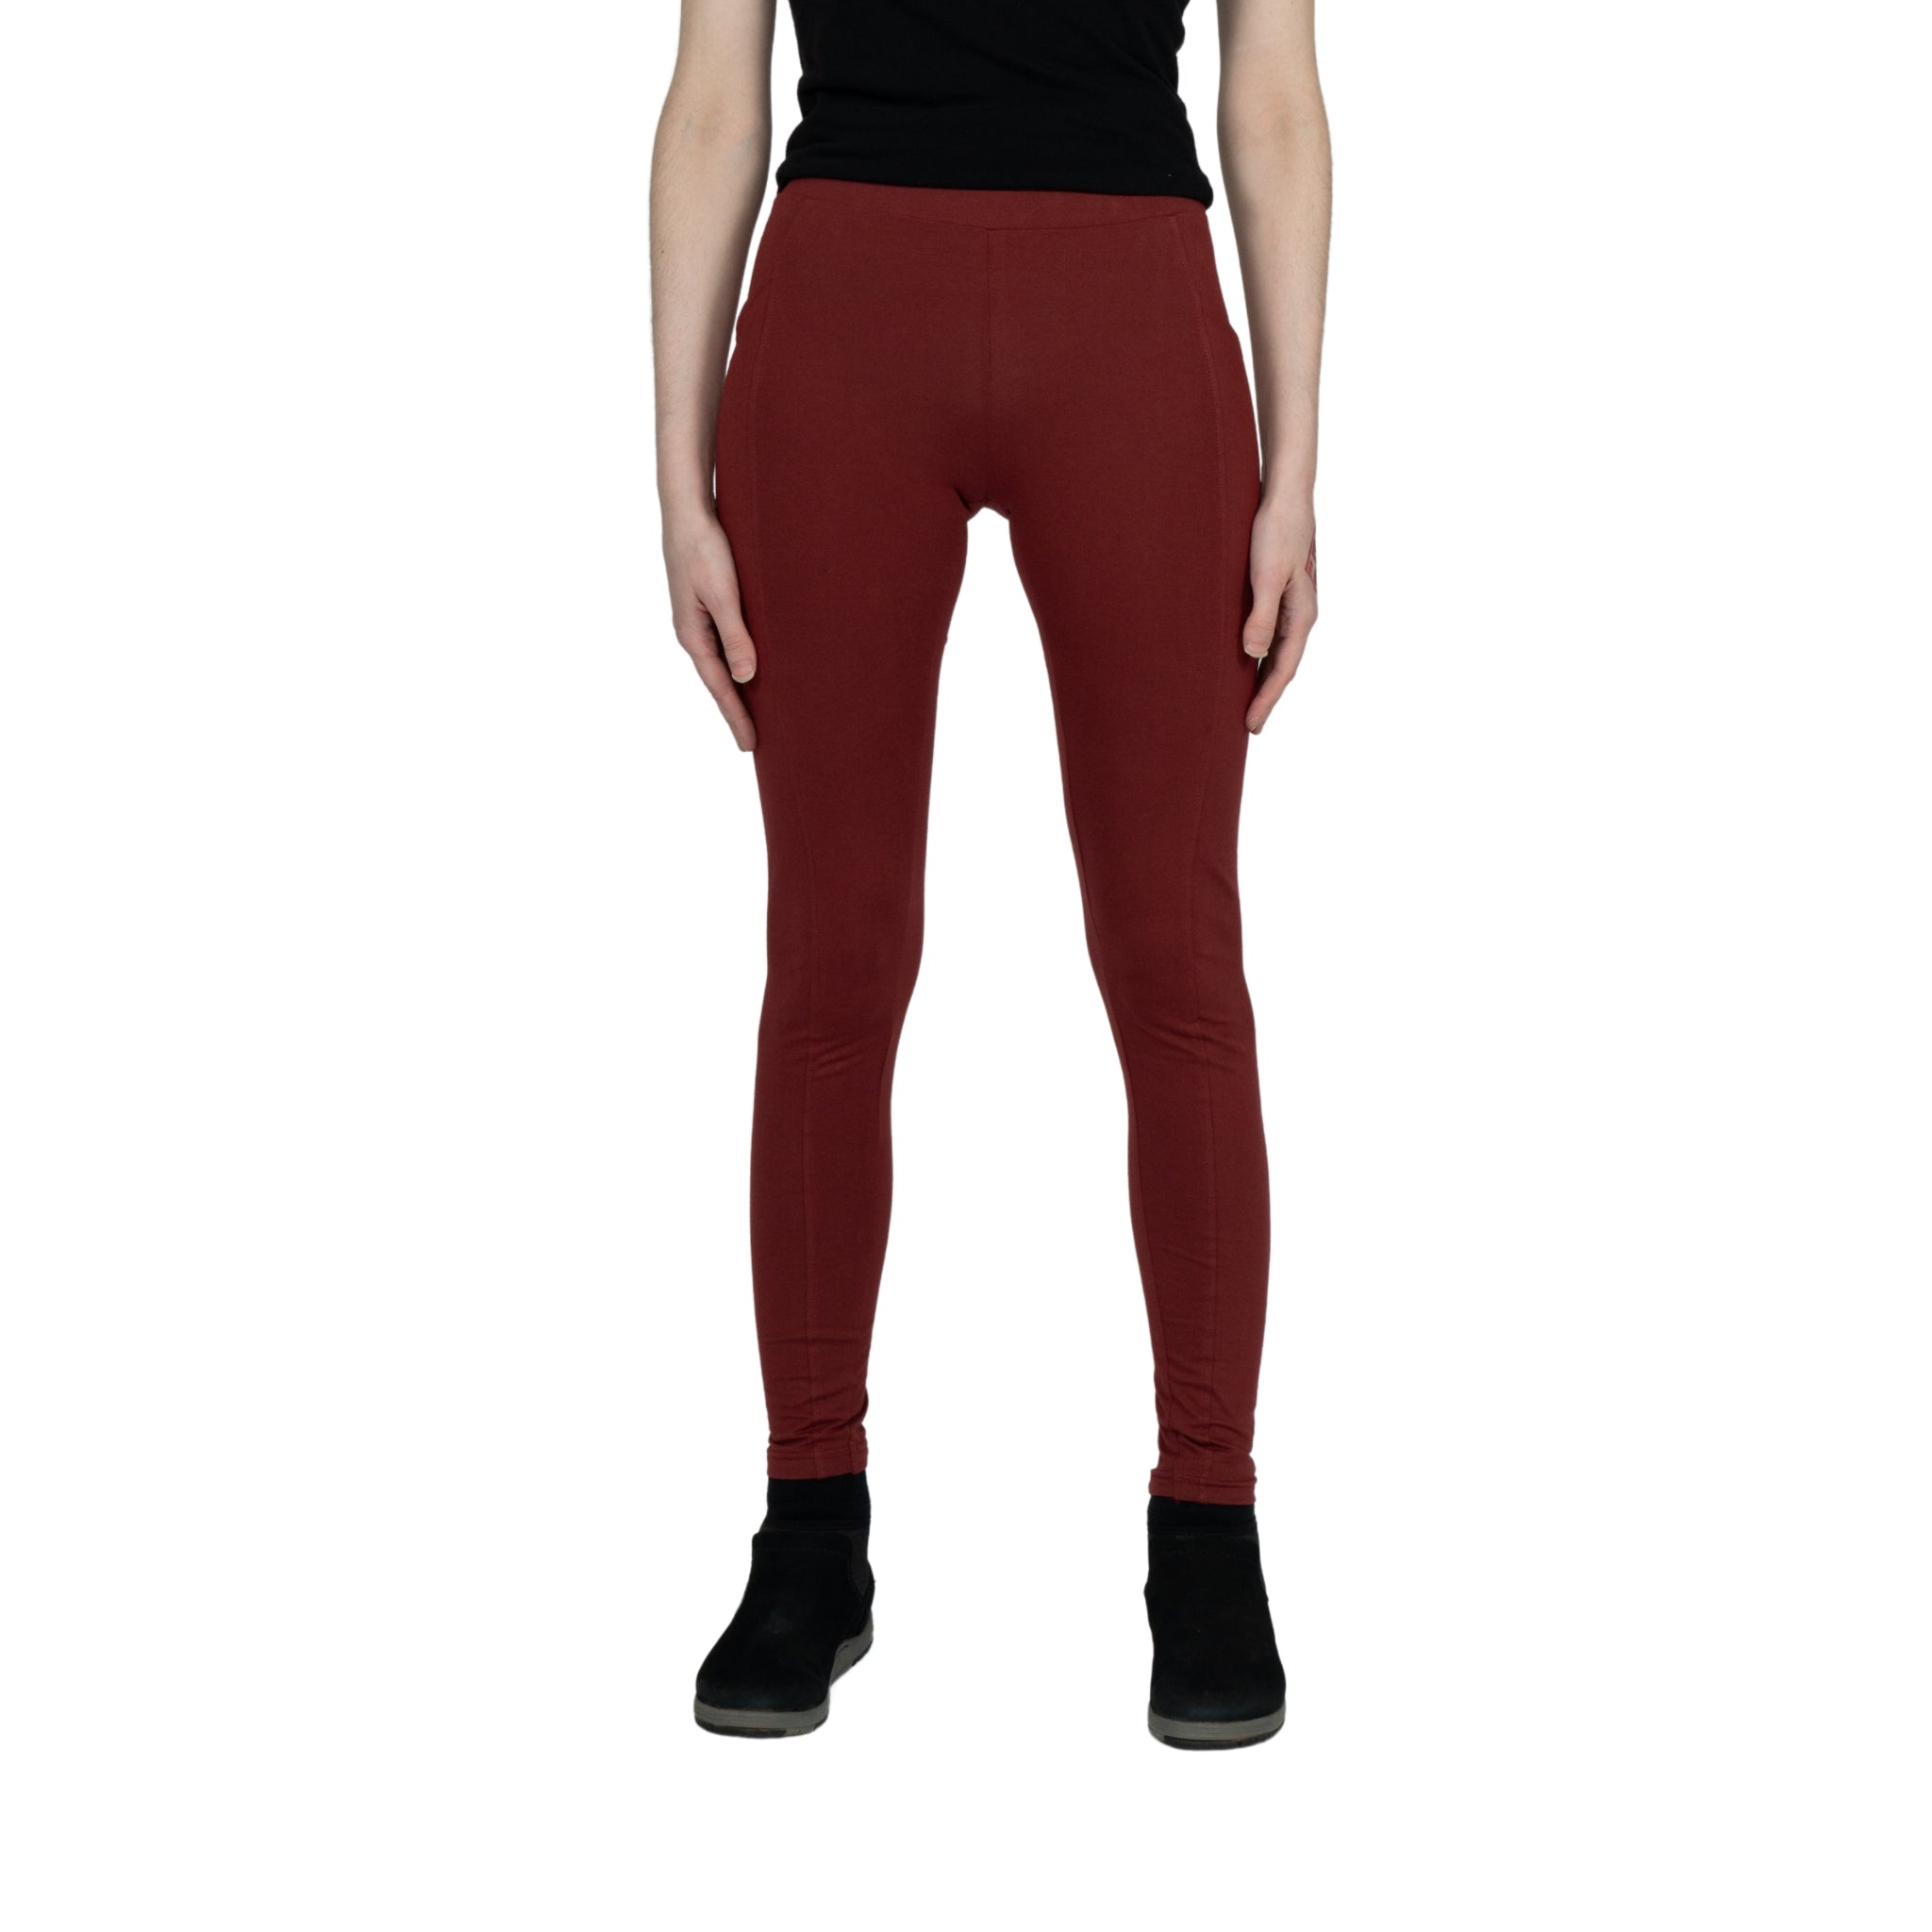 Maroon Adults Leggings with Pockets